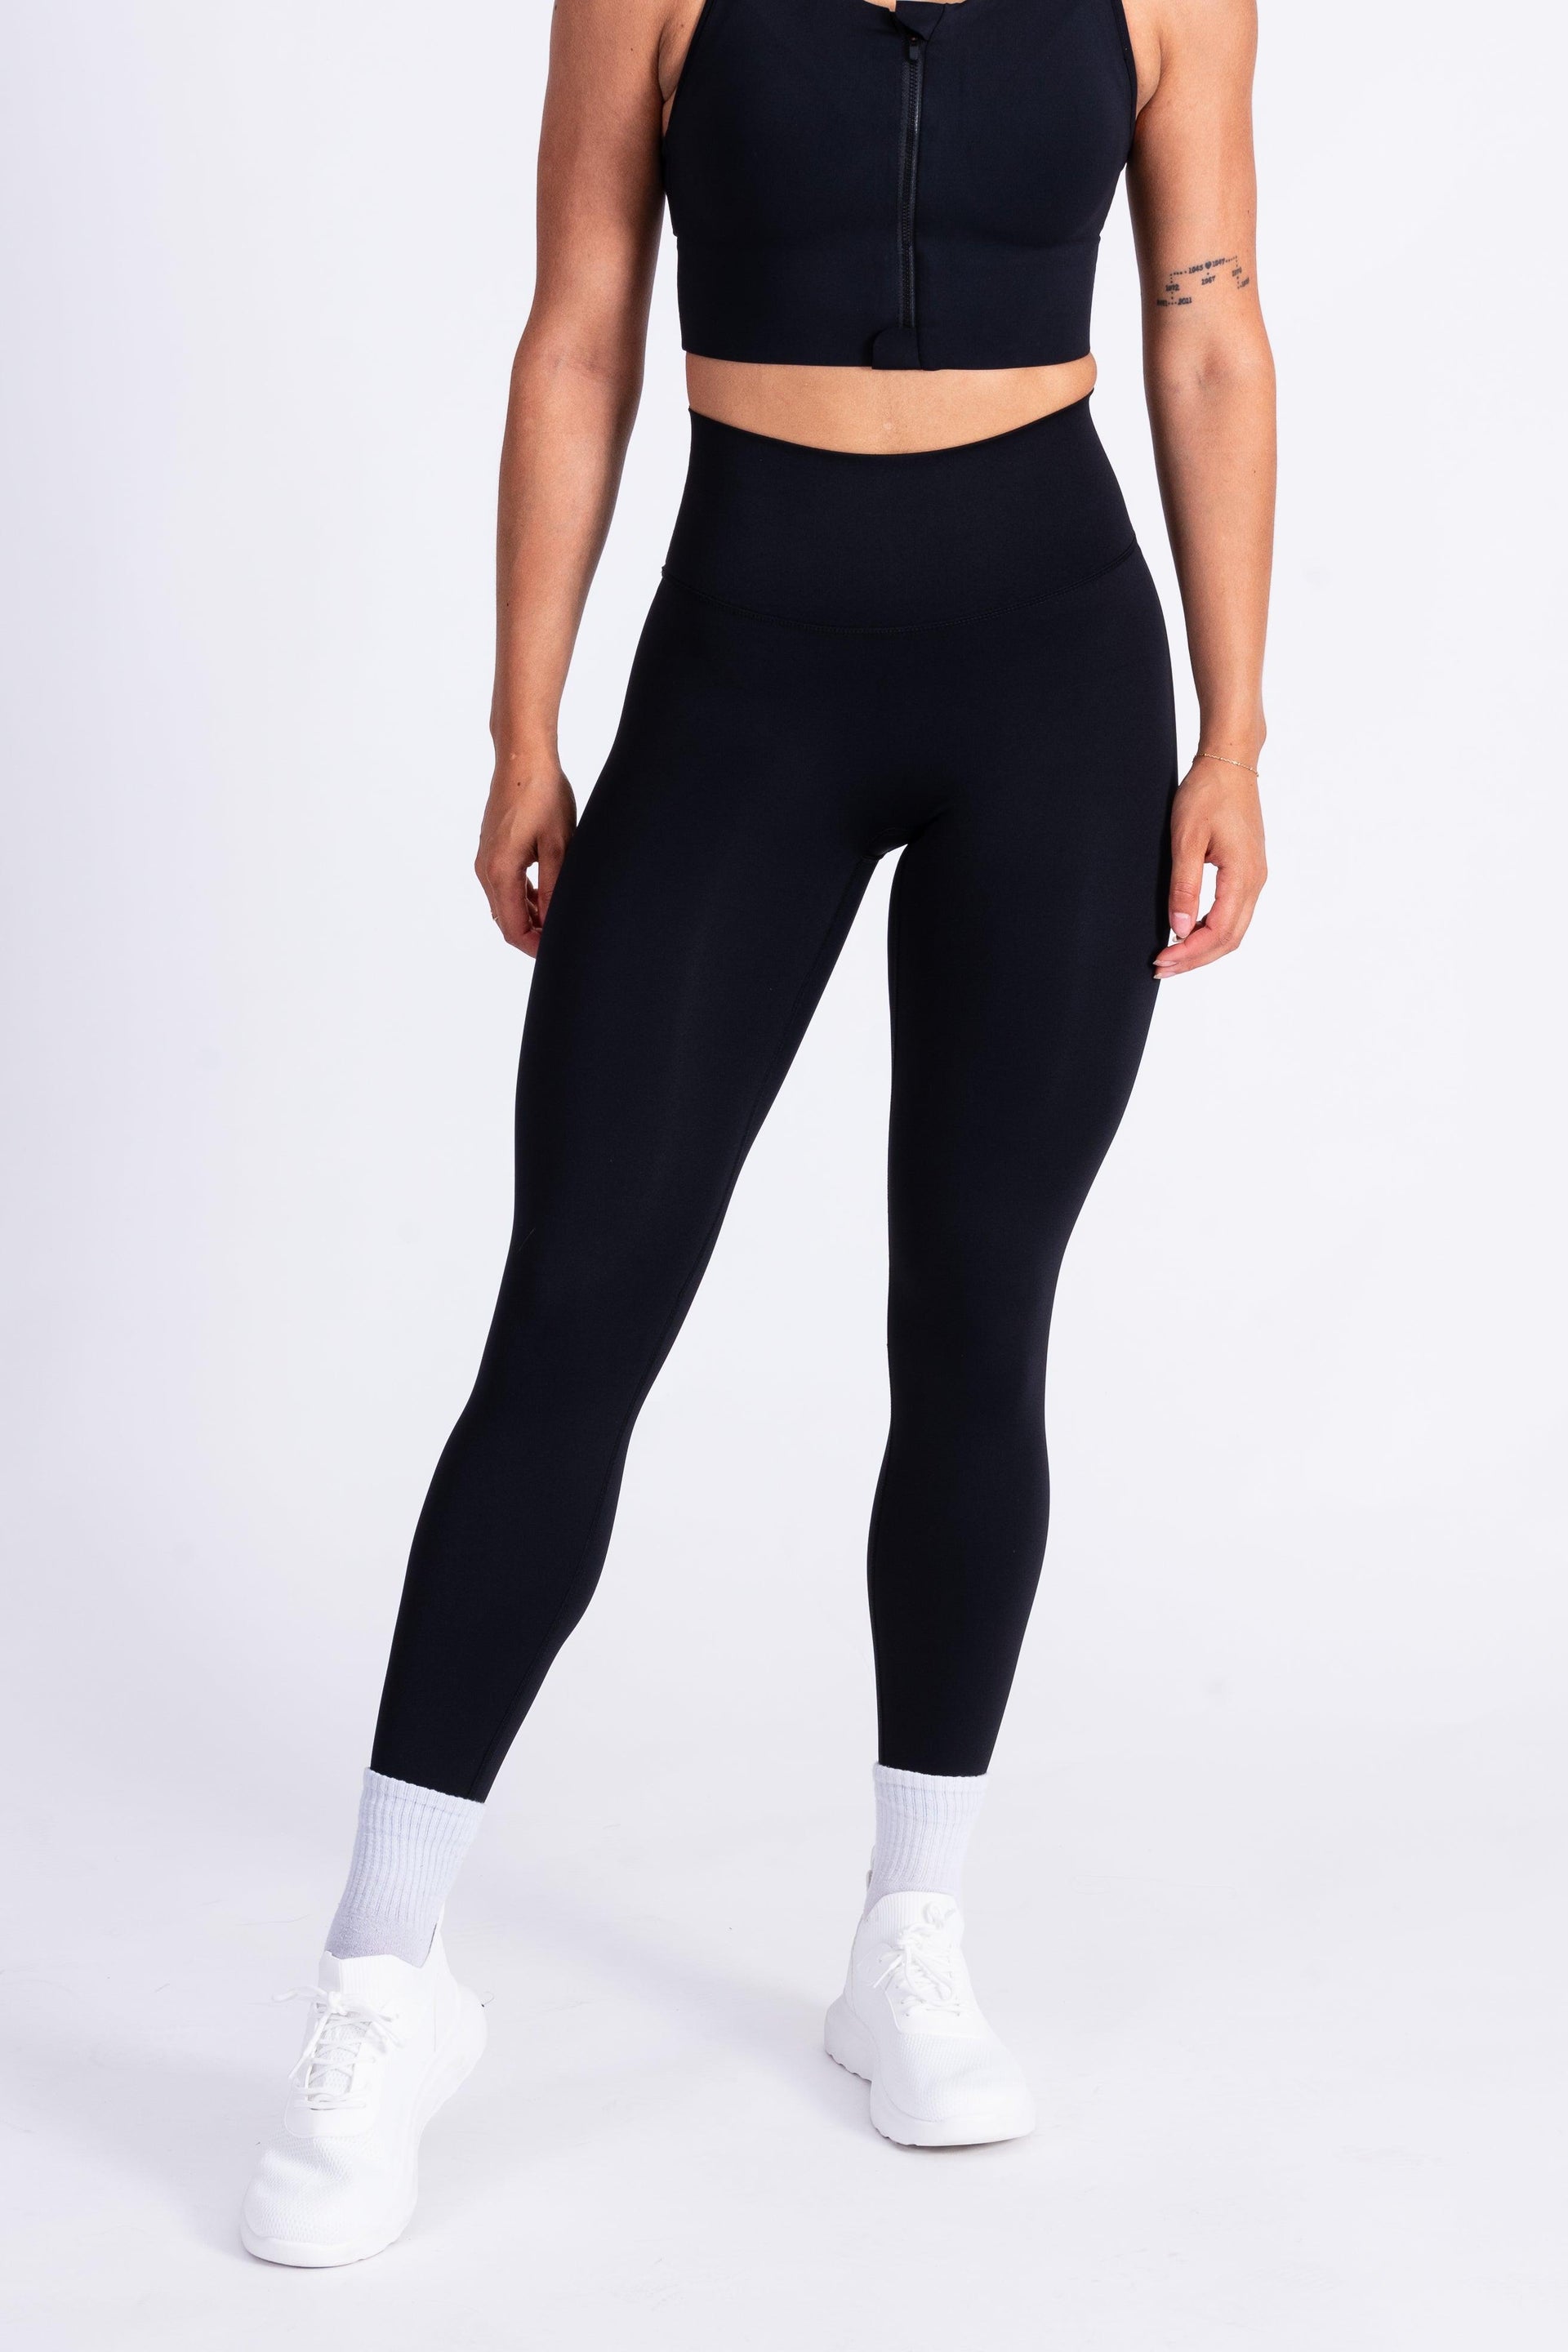 All in Motion Simplicity Mid Rise Leggings black Small Target Workout 27”  Ankle